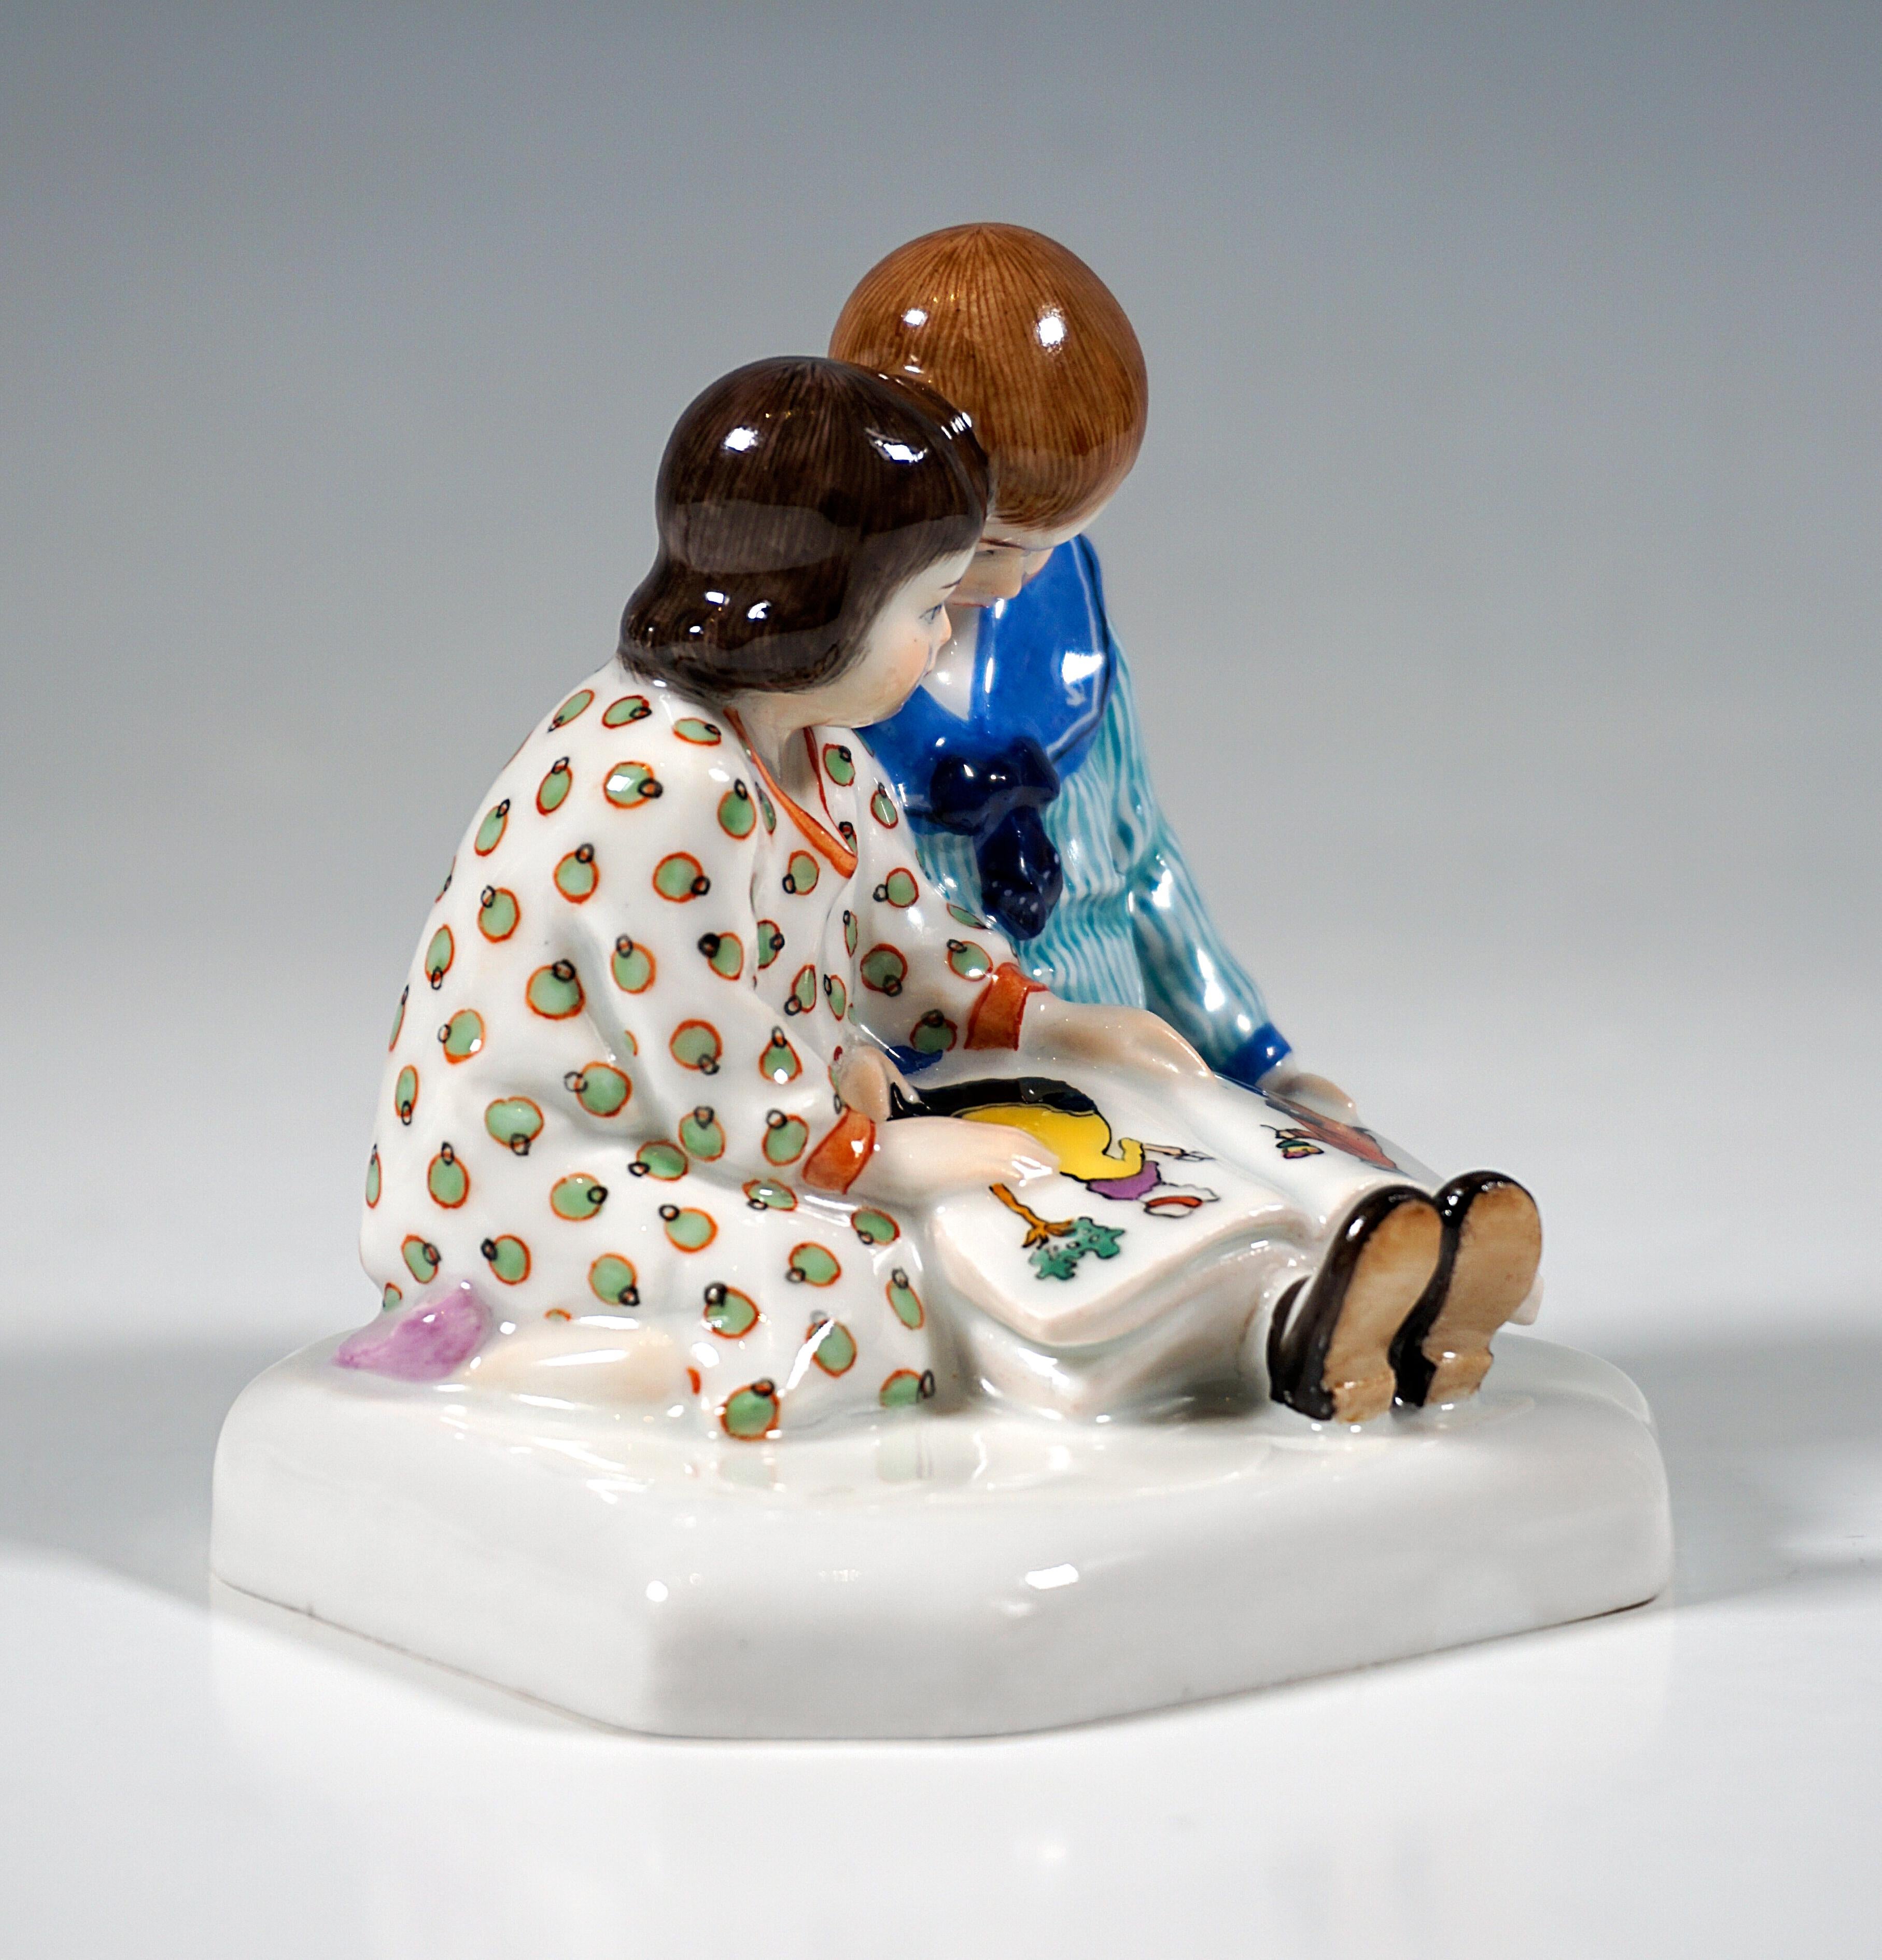 Extremely rare Meissen Art Nouveau porcelain group:
A boy in a sailor suit sitting on the floor with outstretched legs, a large picture book on his lap, next to him, head to head, a kneeling girl in a dotted dress, pointing to a picture.
Based on